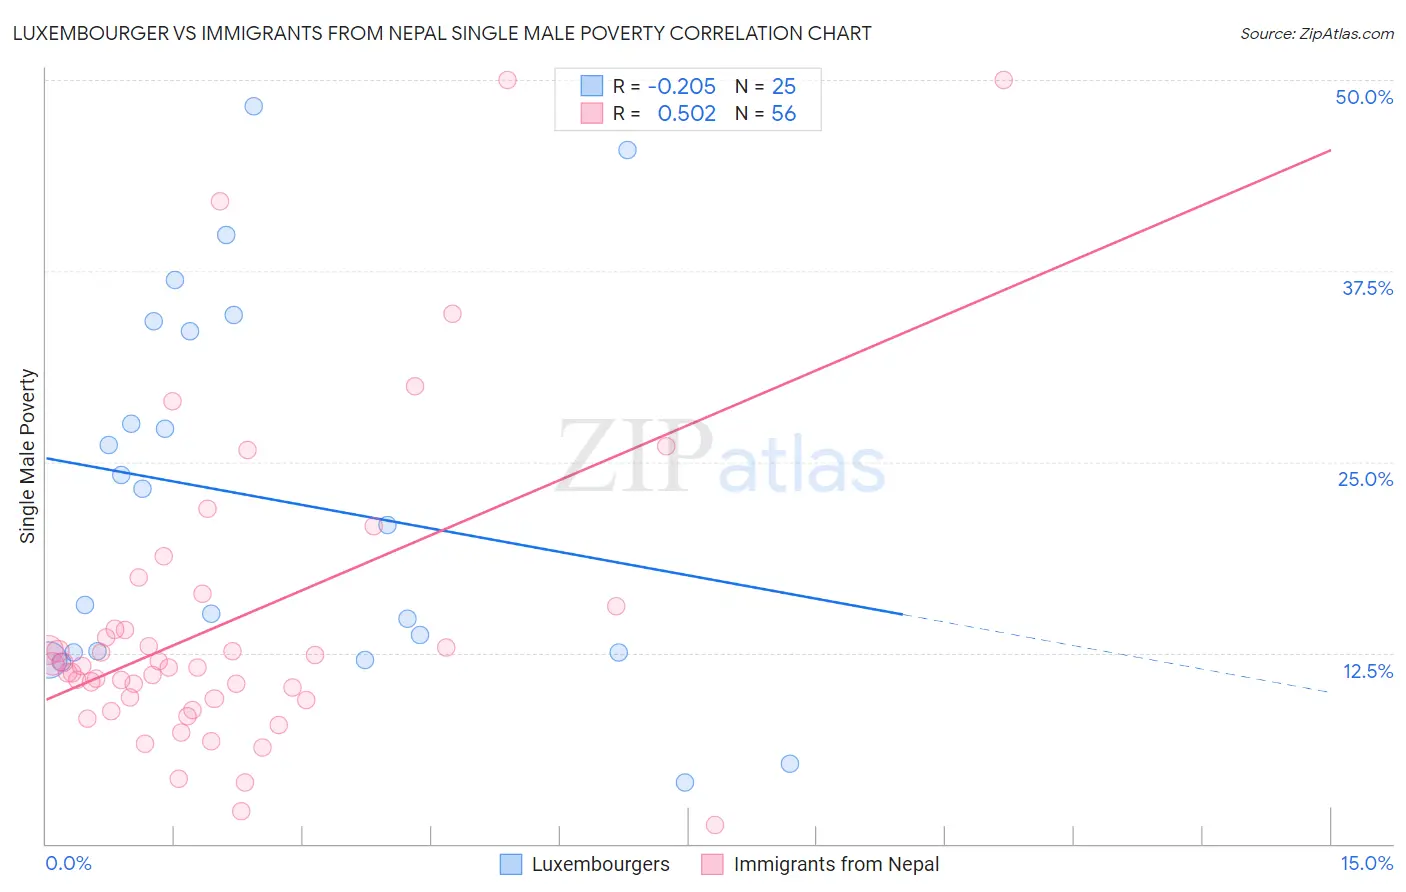 Luxembourger vs Immigrants from Nepal Single Male Poverty